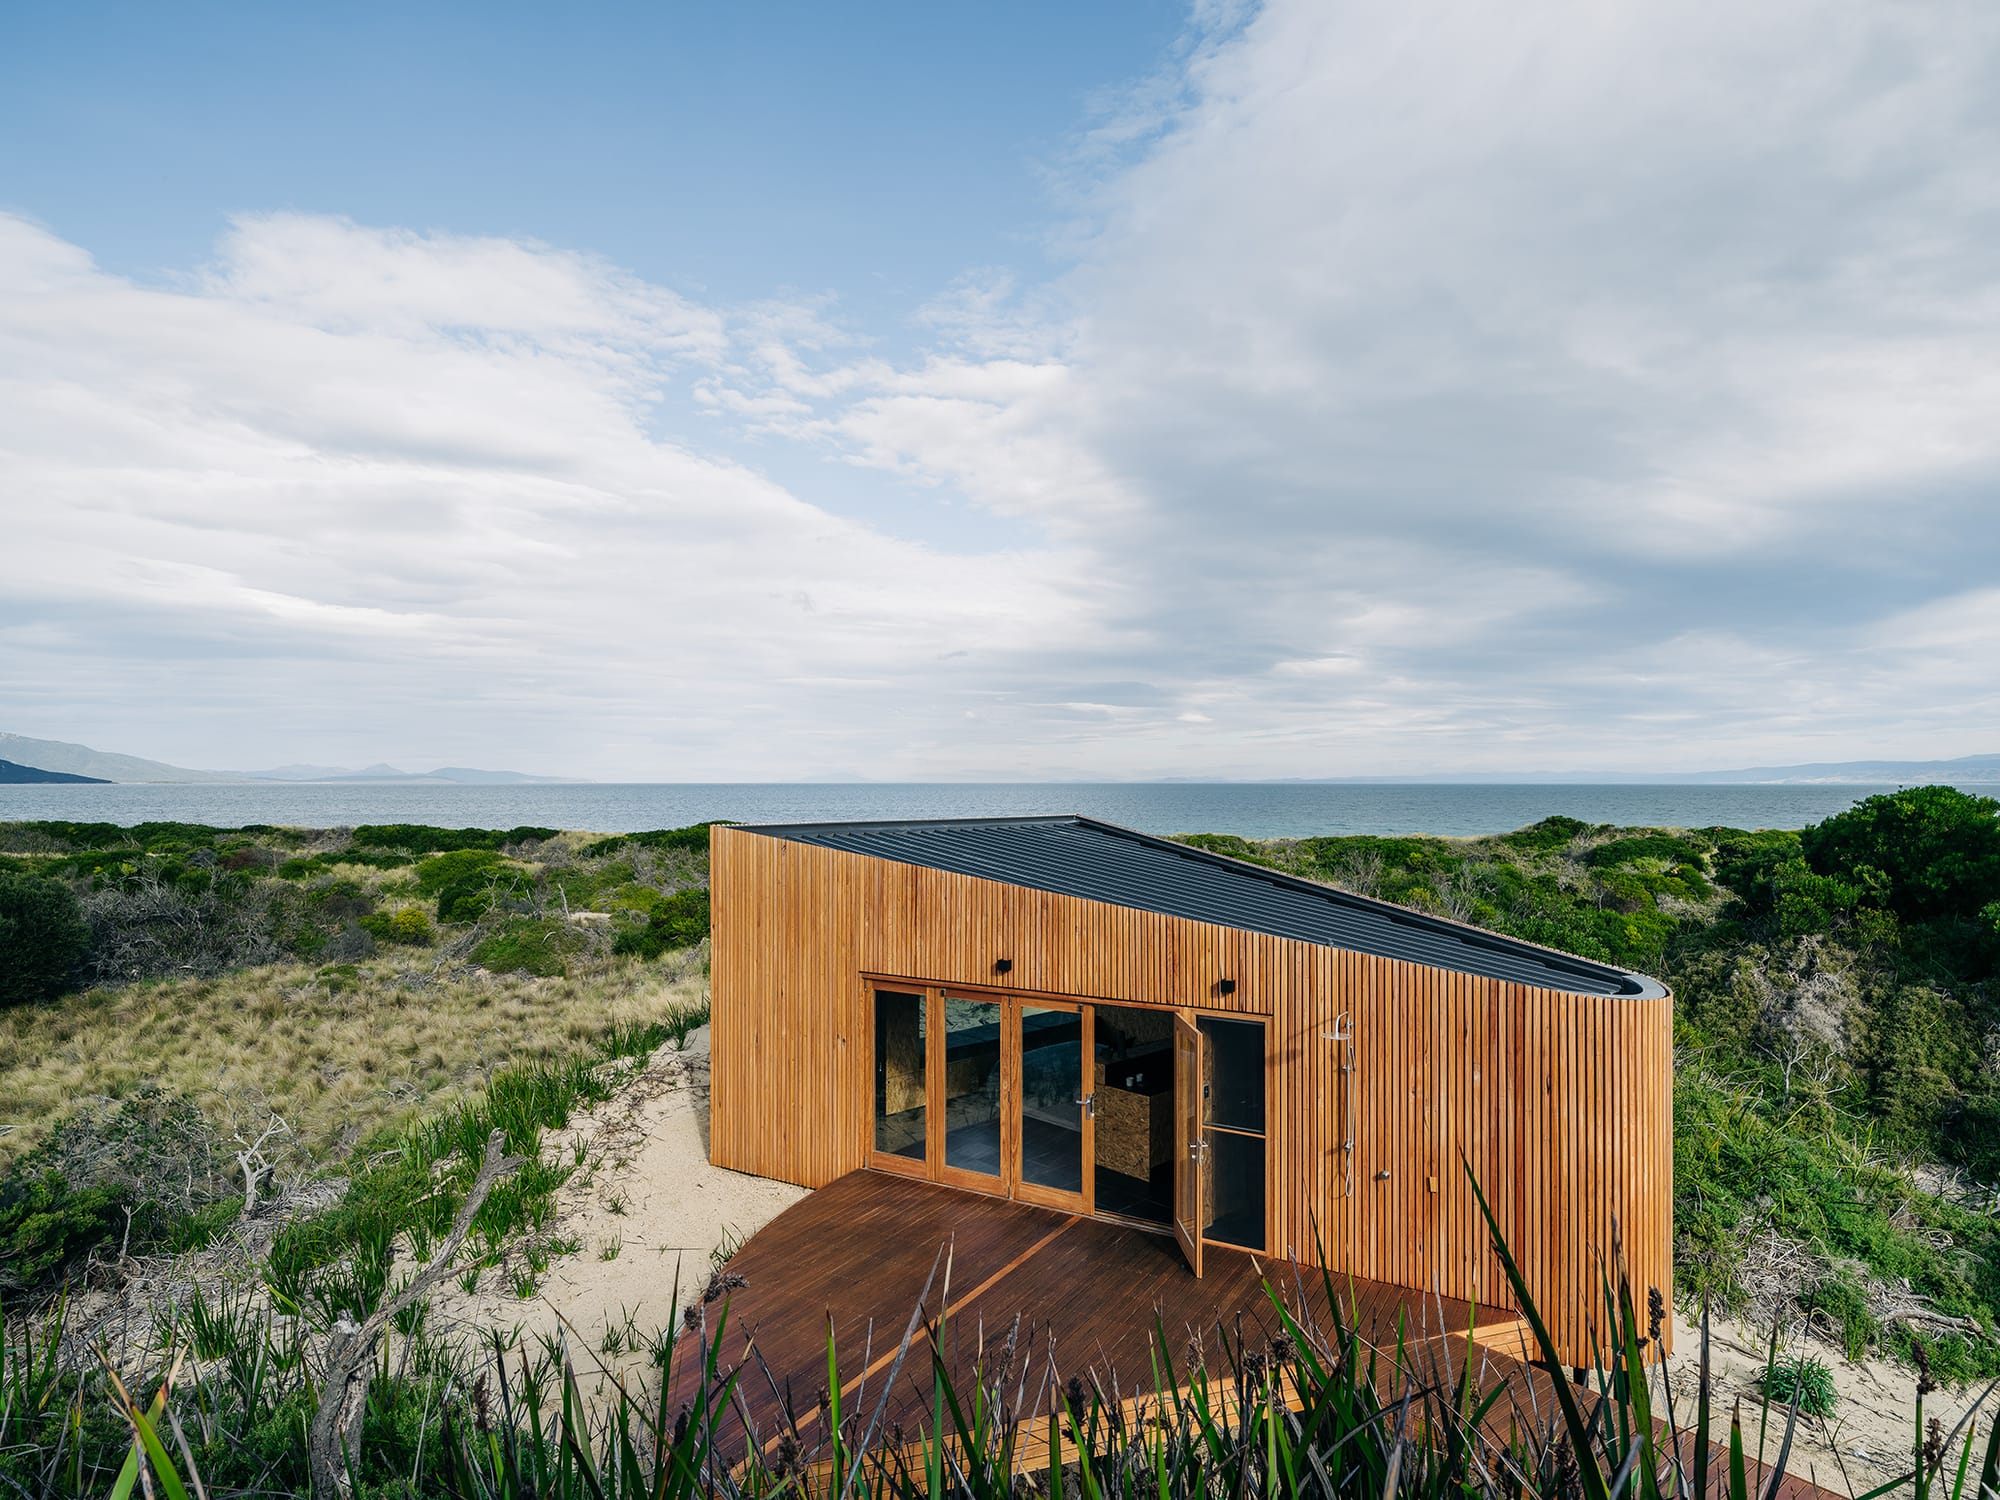 Studio Tasmania in Dolphin Sands, Tasmania. A ground-level perspective showing the studio's wooden exterior and innovative design, which allows it to sit lightly on the landscape. The building's integration with the coastal environment is emphasized by the sandy dune it rests upon, offering a sustainable and immersive connection to the natural setting.